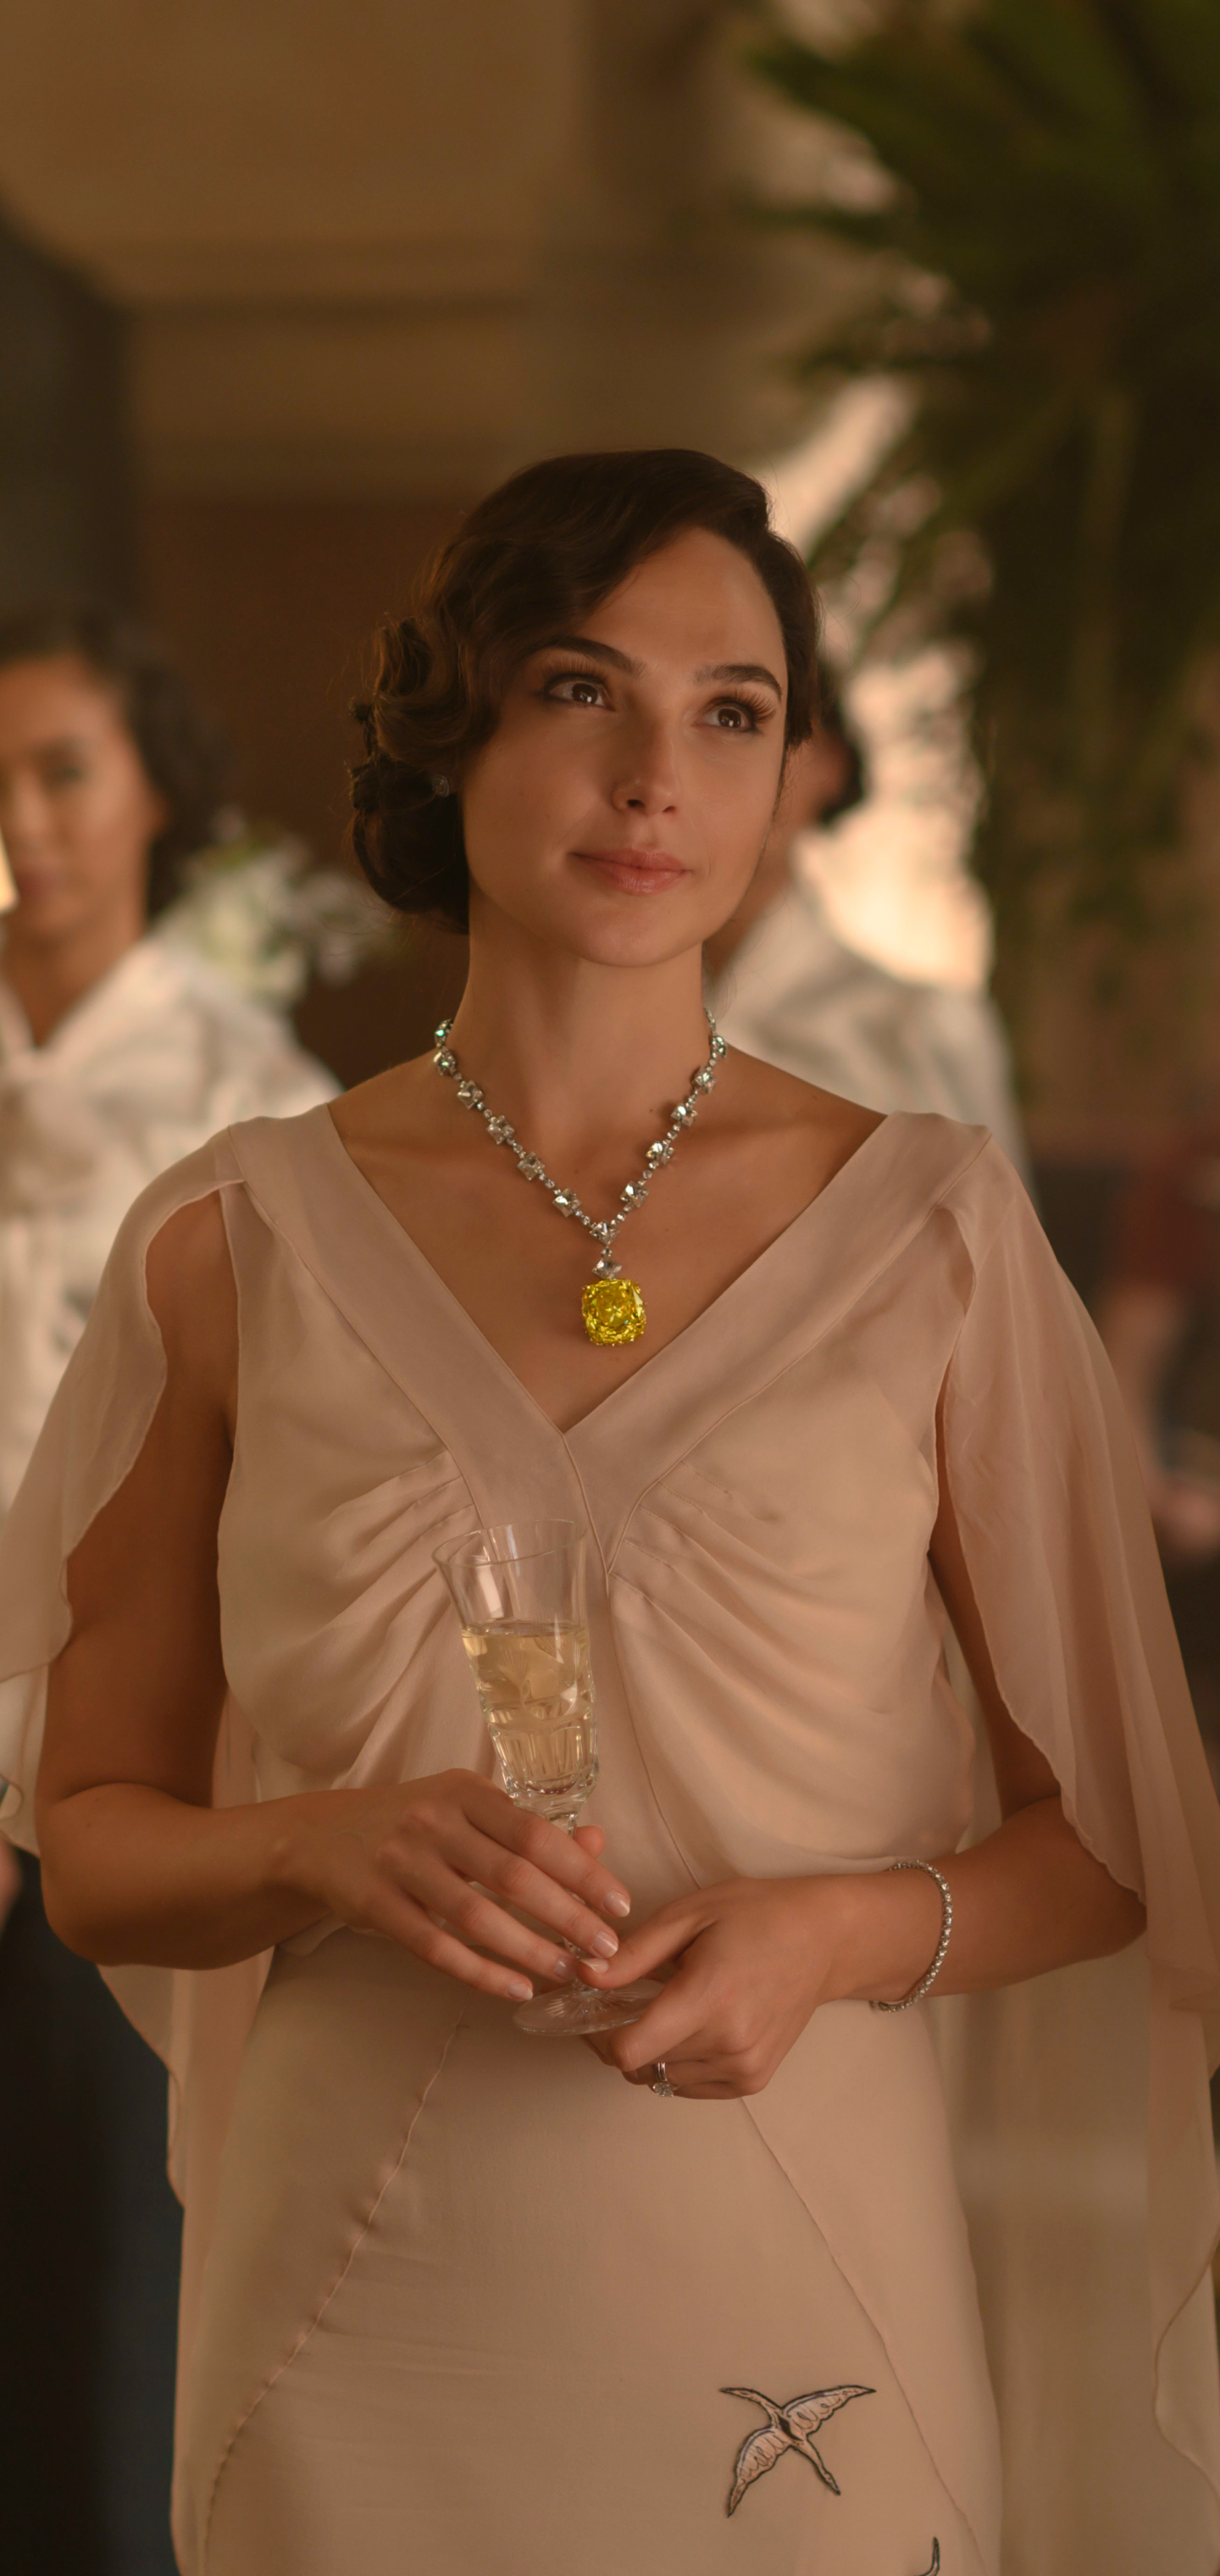 movie, death on the nile (2022), gal gadot phone wallpaper